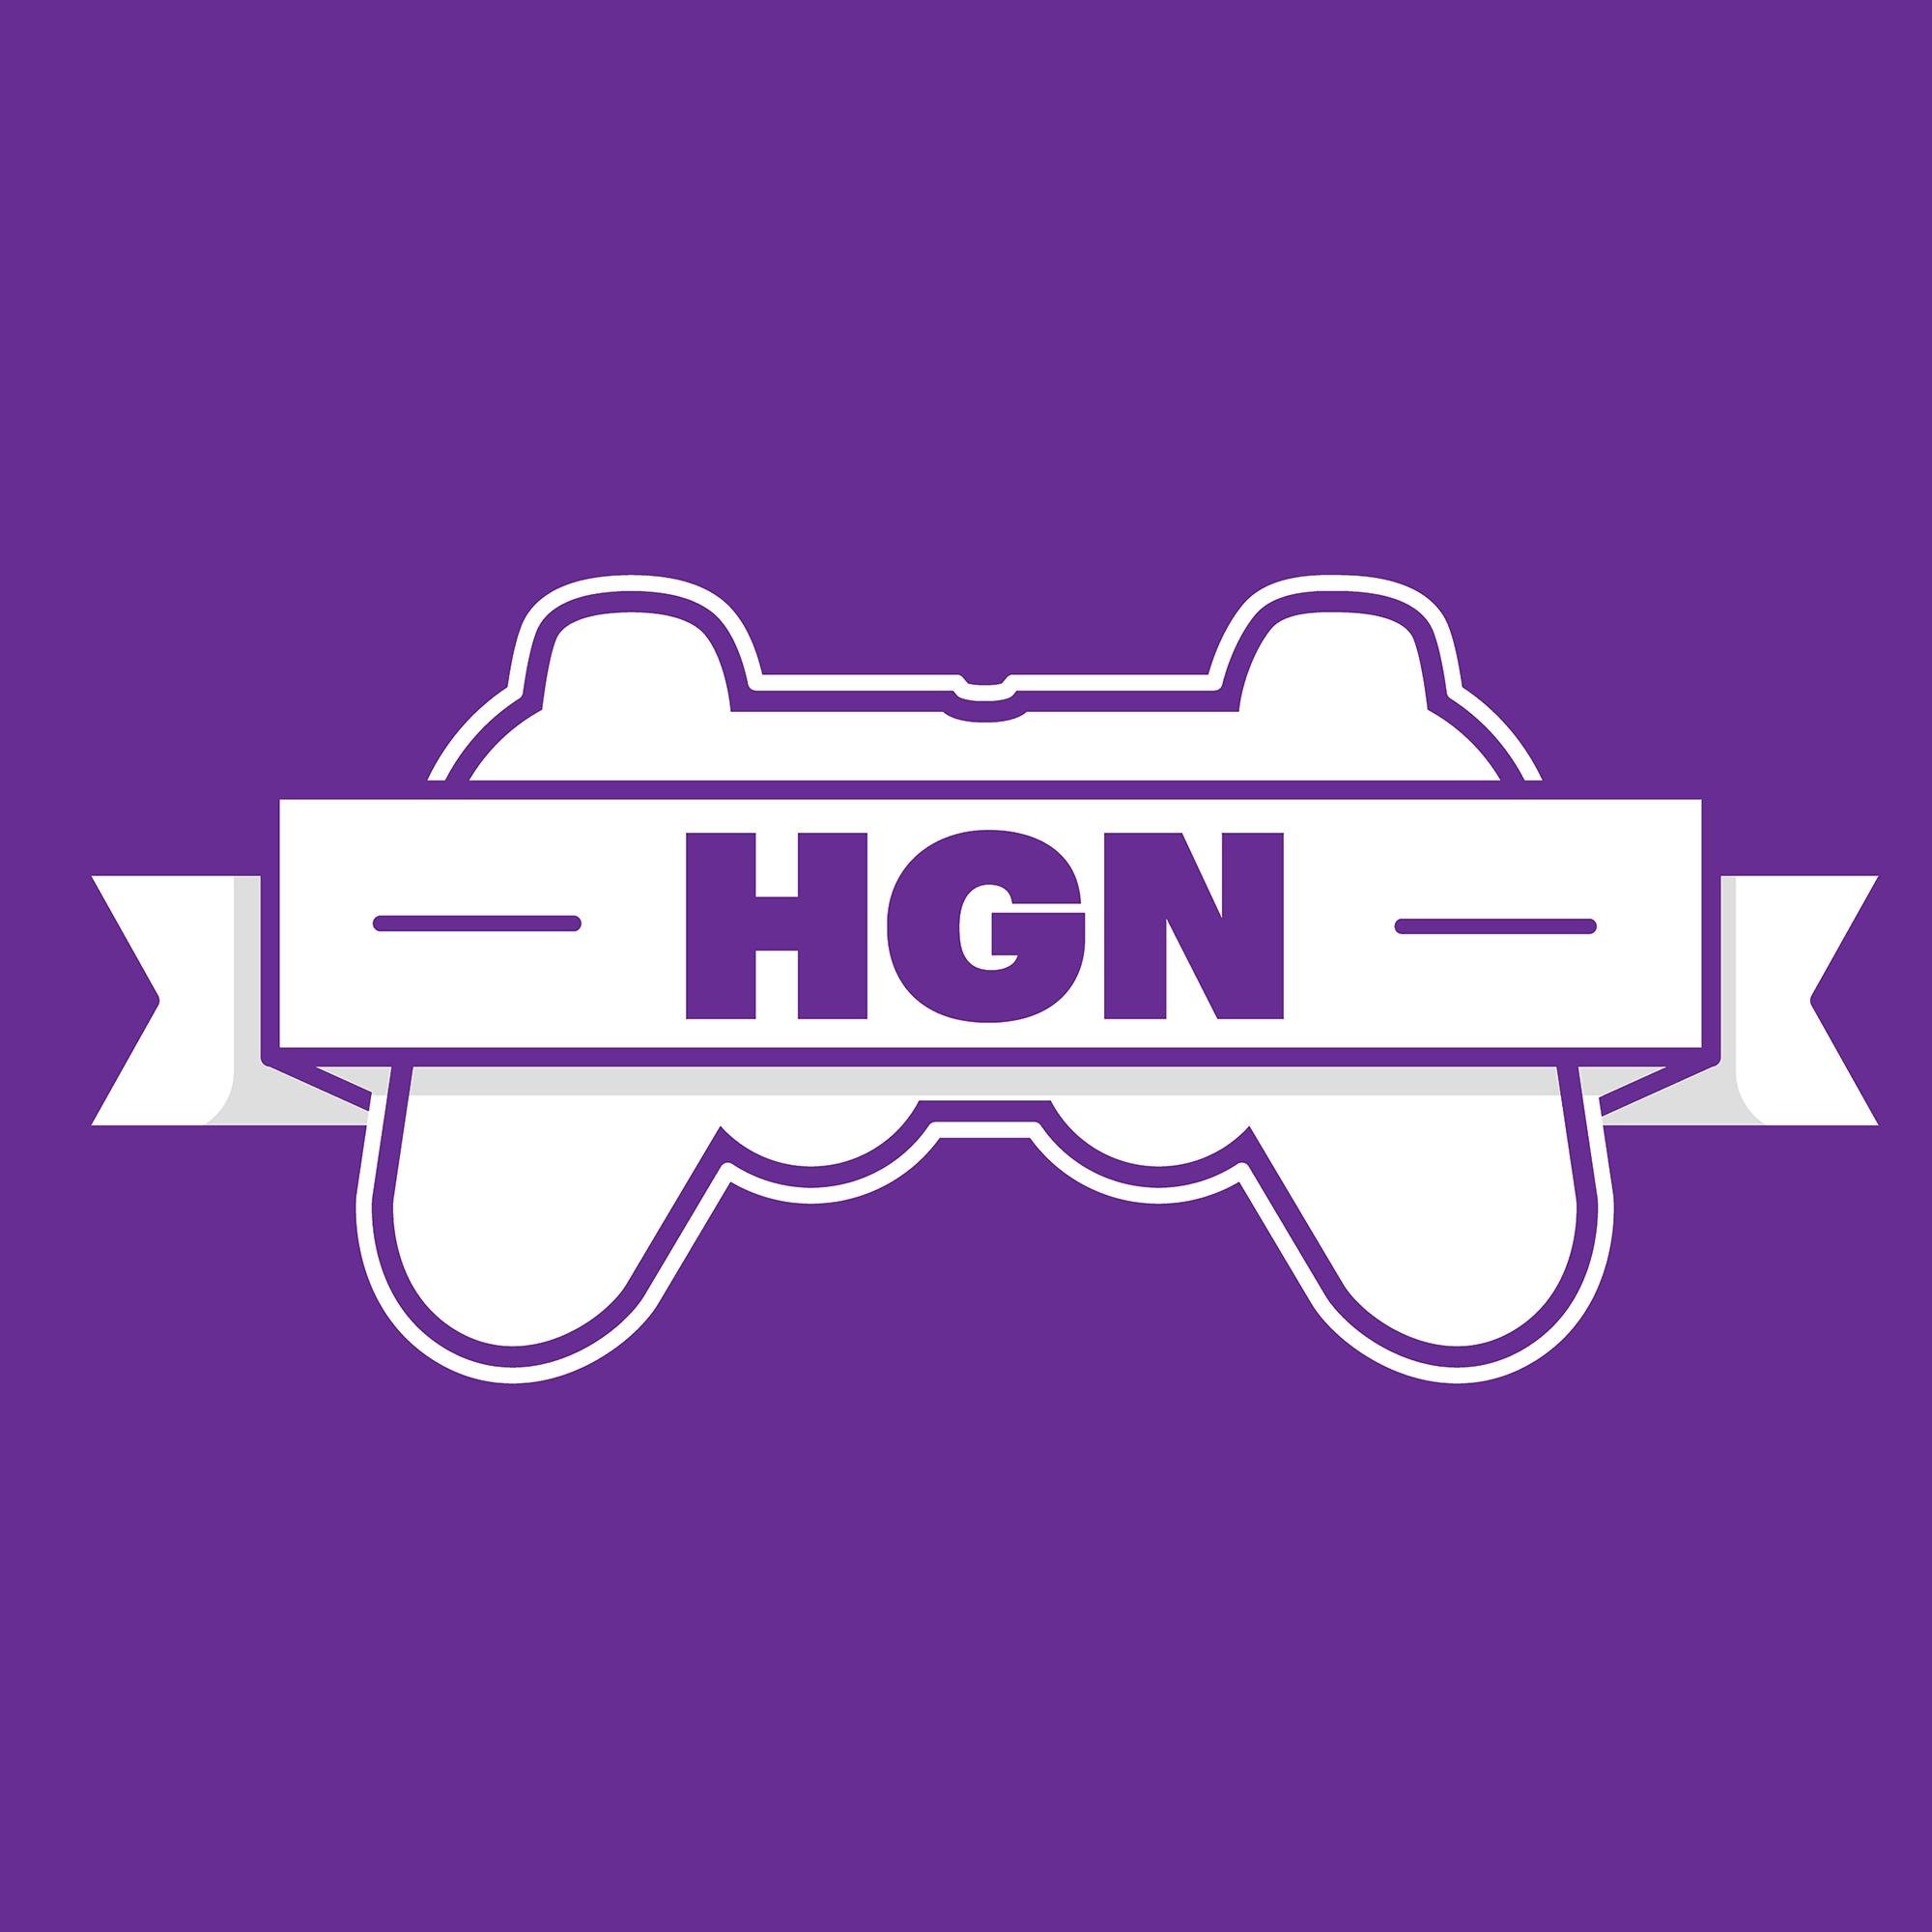 Husky Gamer Nation provides a general gaming community for the University of Washington. Our mission is to unite the gamers of all platforms at UW